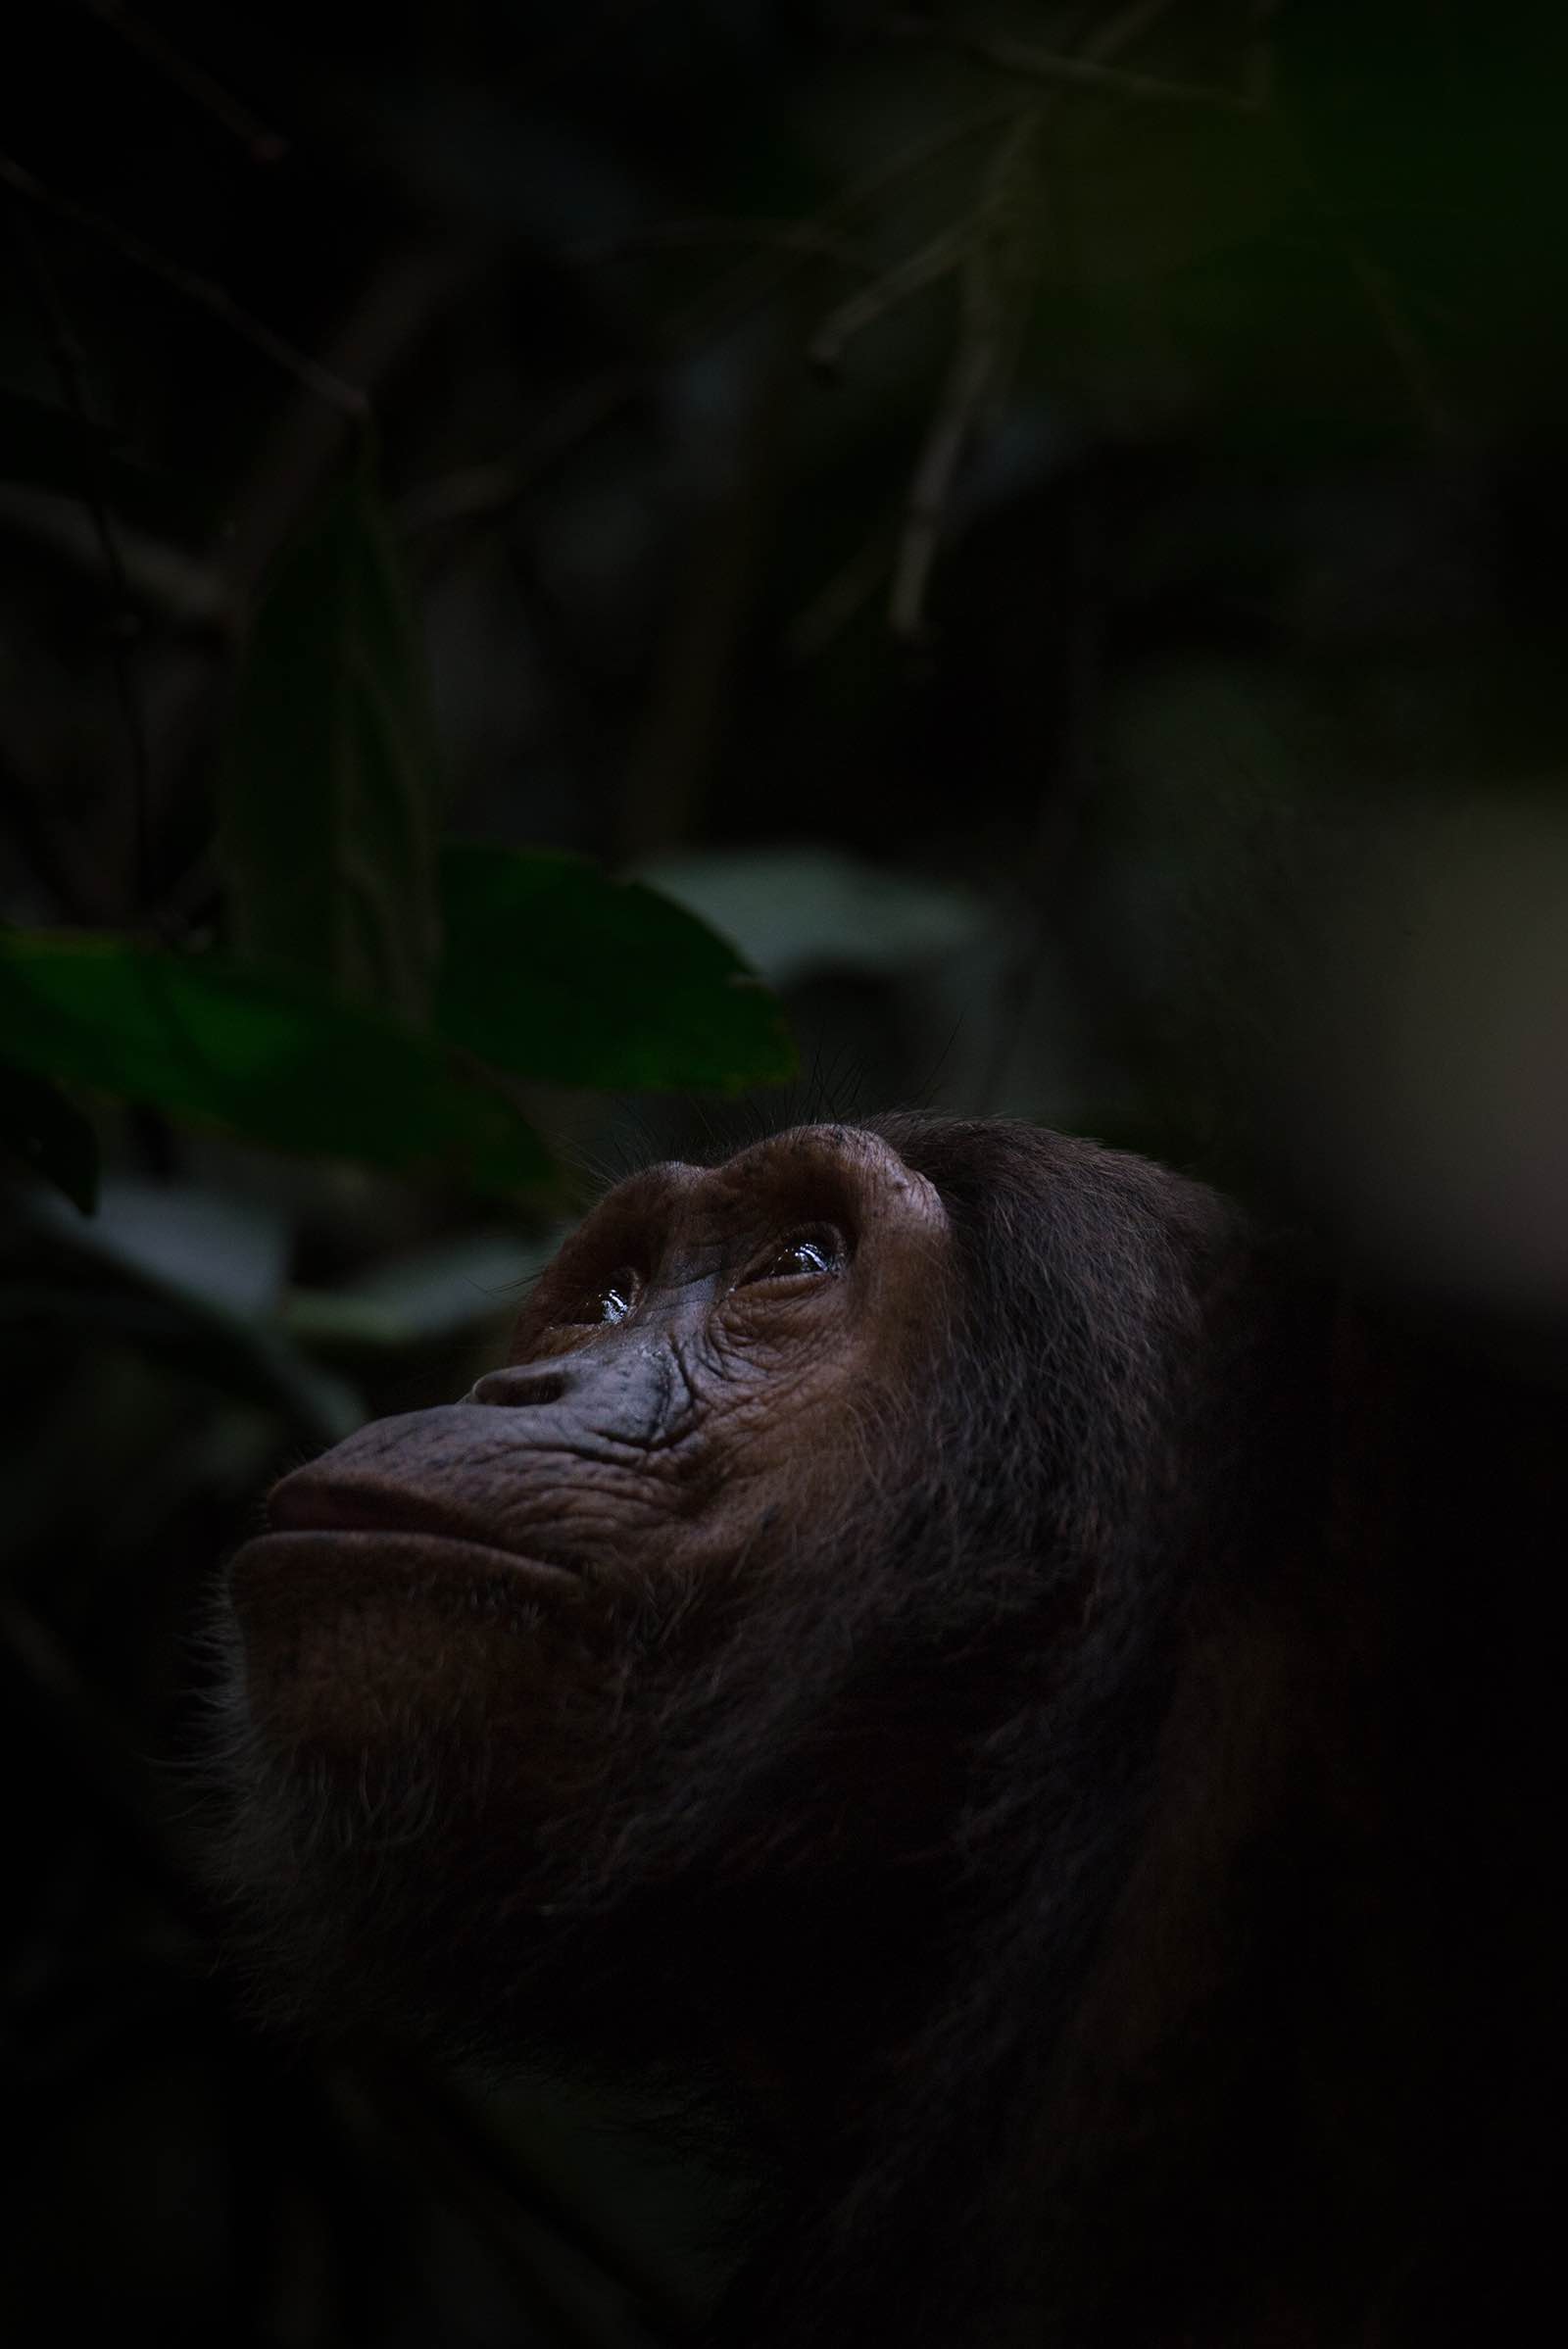 Looking up and watching other chimpanzees in the trees